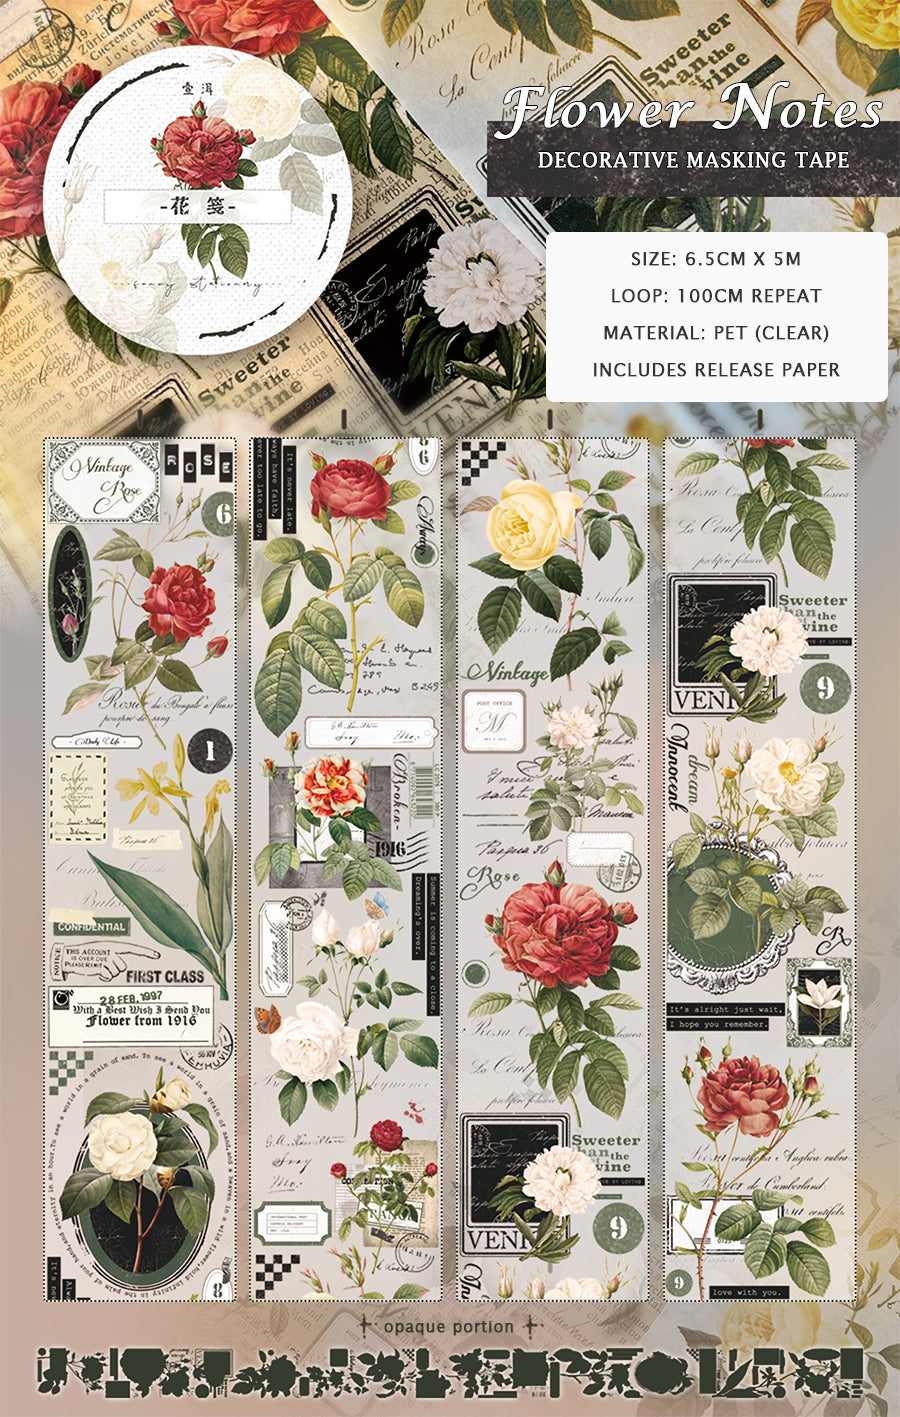 Yier Masking Tape: Floral Notes